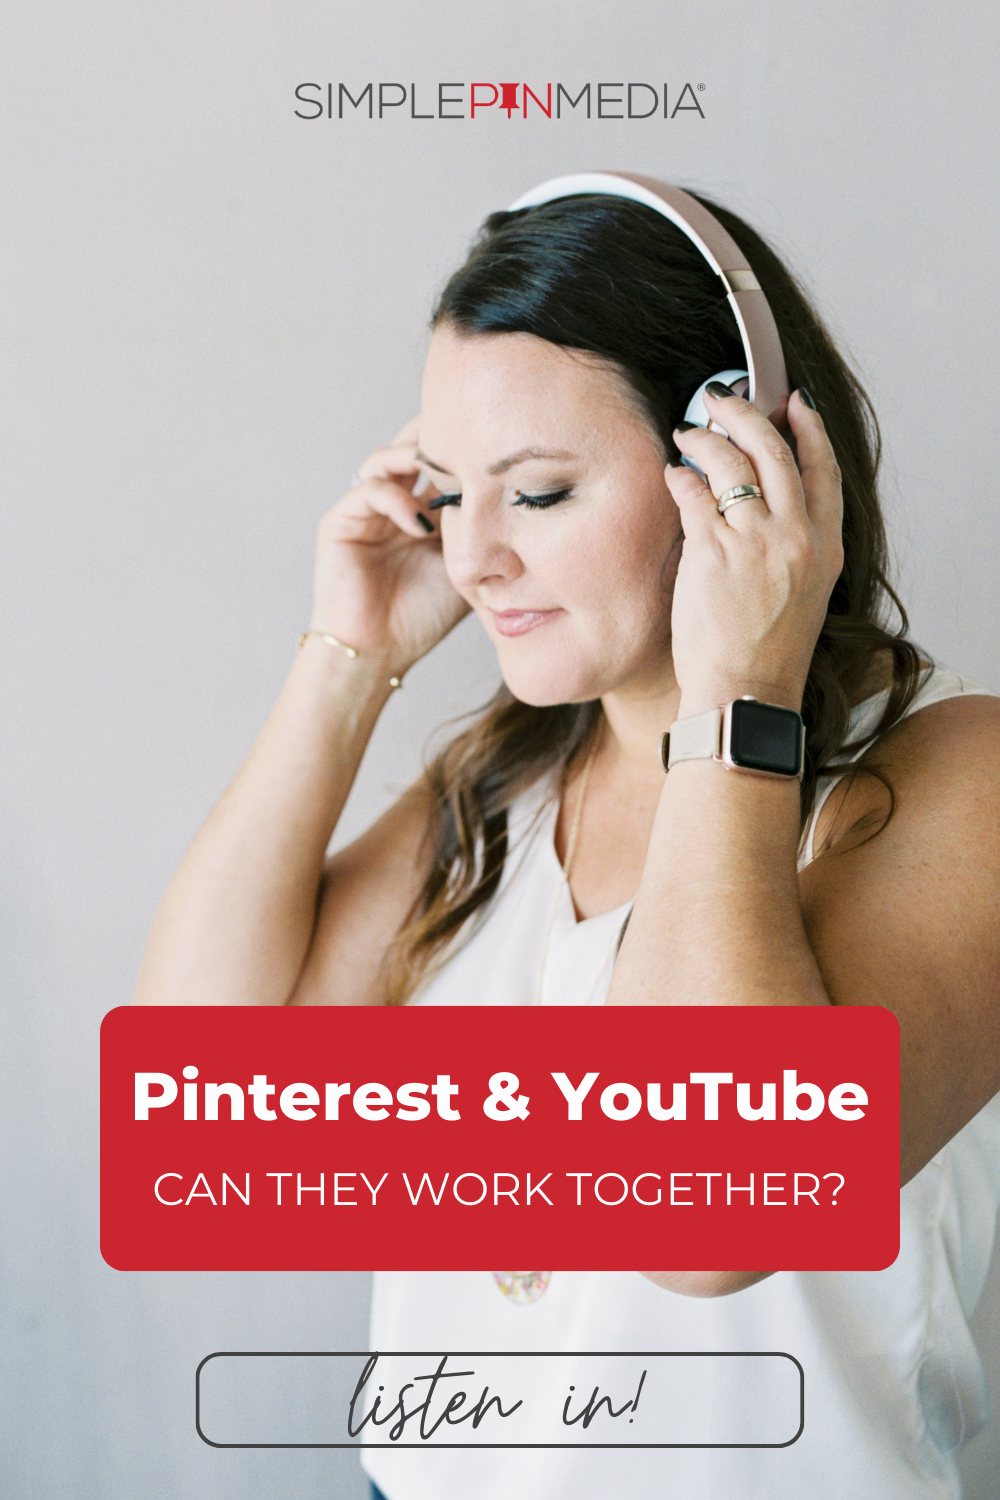 347 – How to Promote Your YouTube Channel on Pinterest